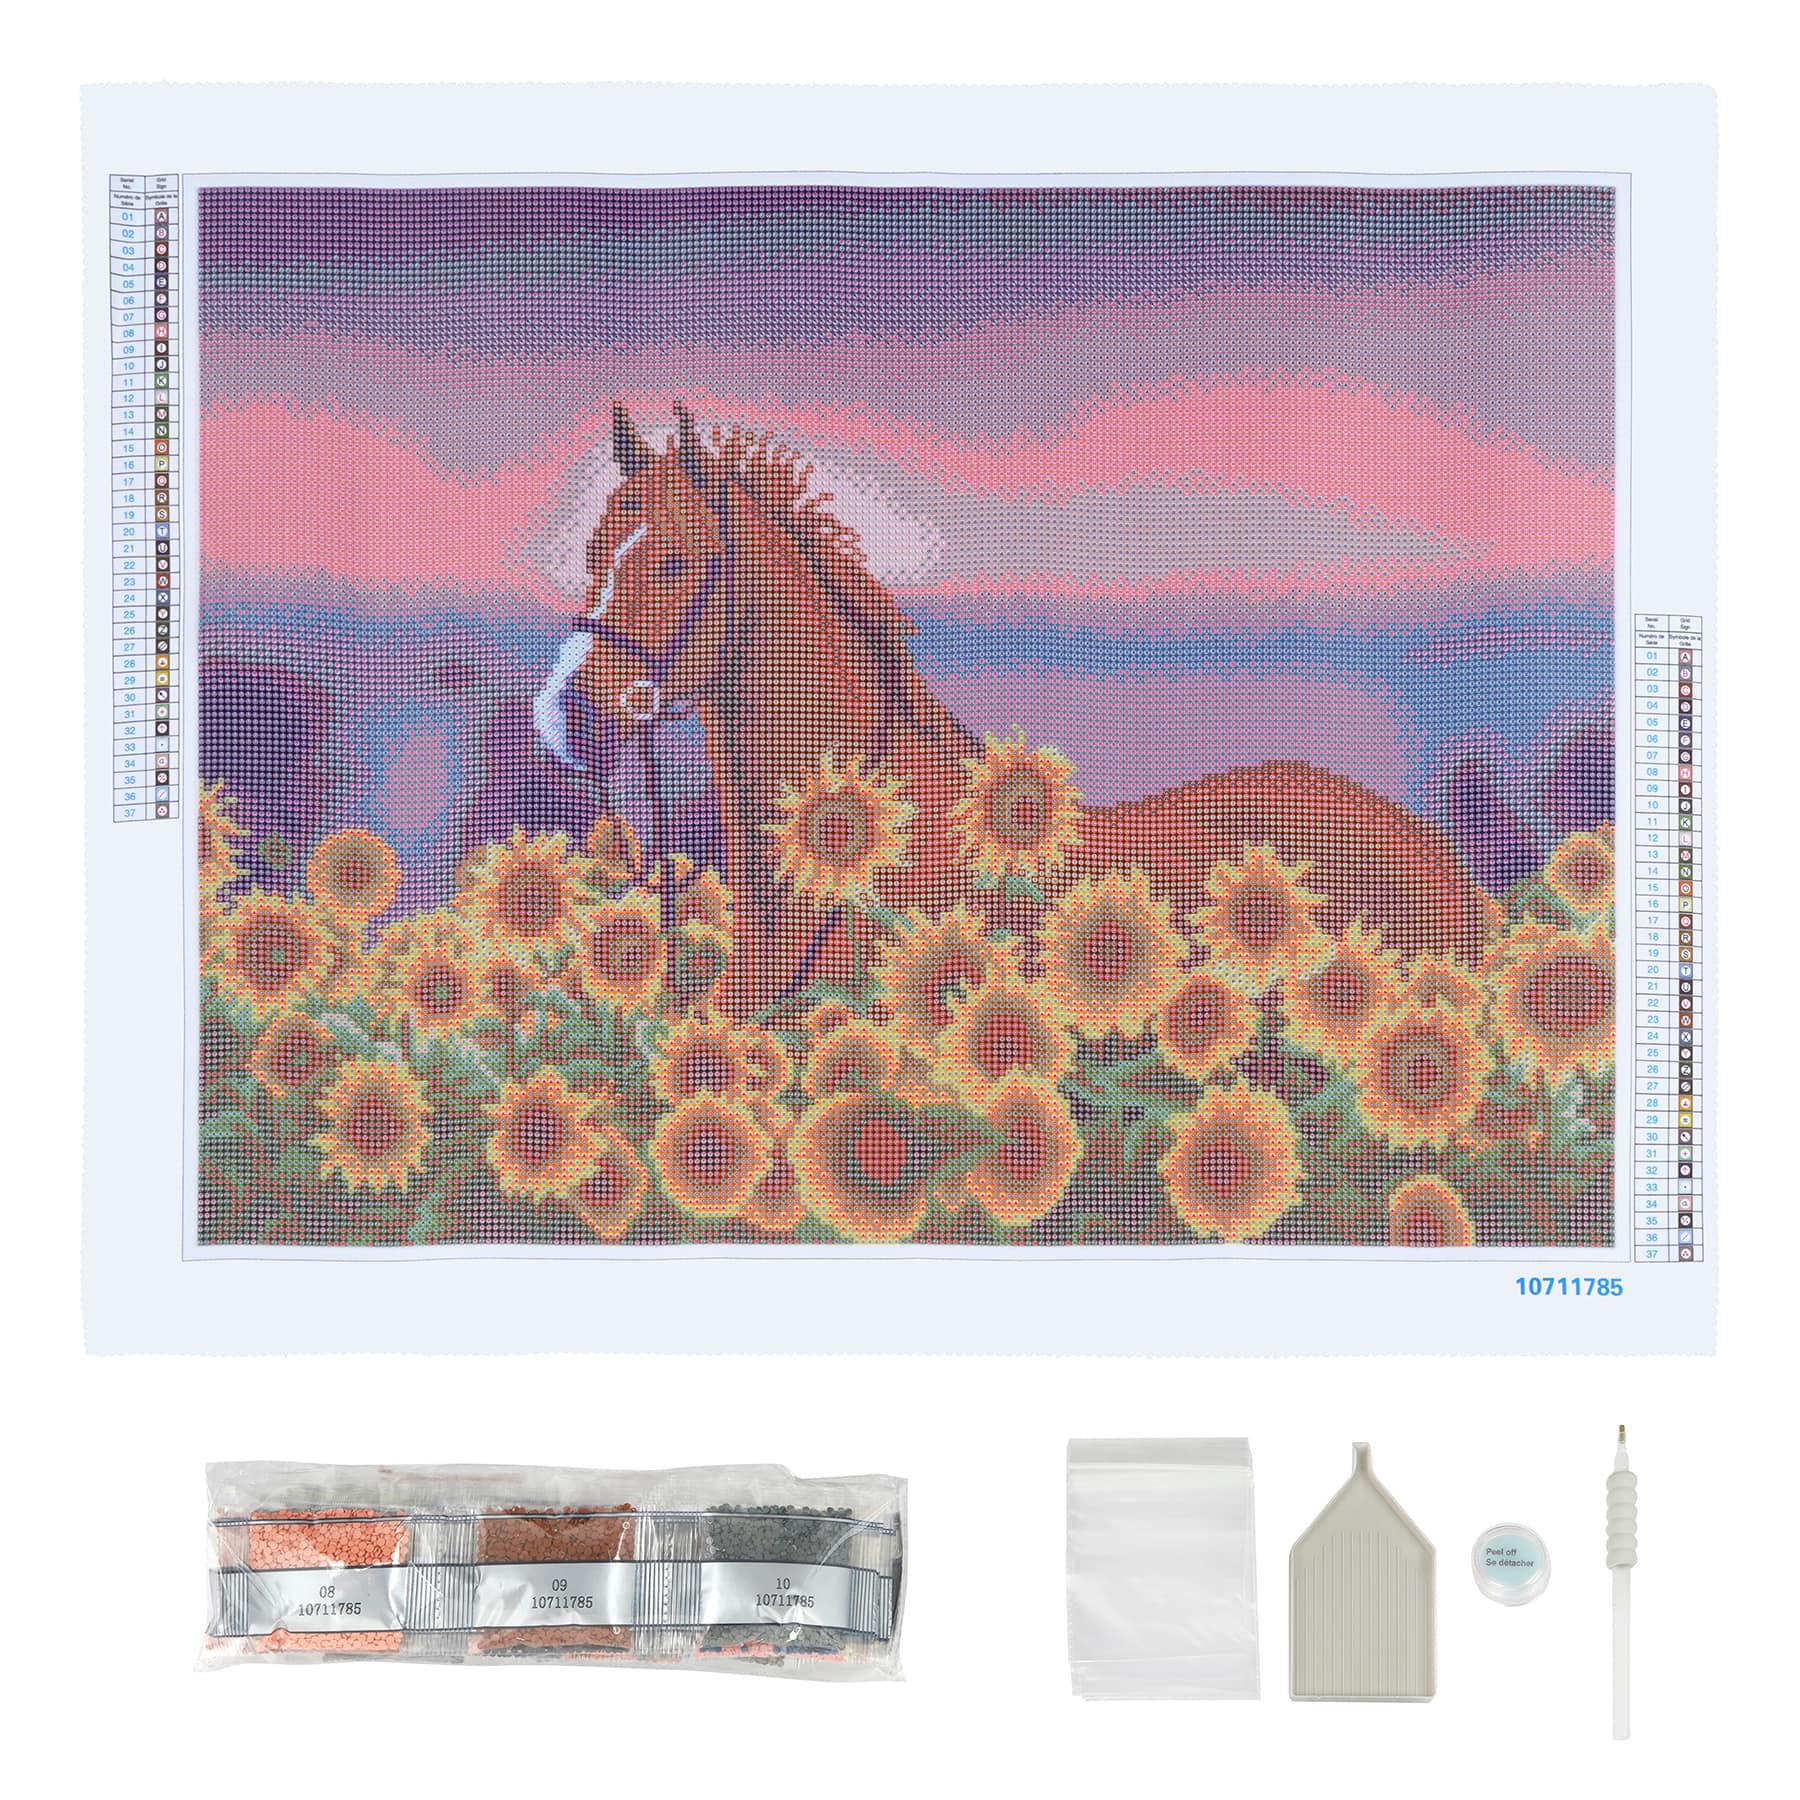 CHOSIGHT 5D Diamond Art Painting Horses Kit - DIY Paint with Diamond Art Oil Painting Round Full Drill Craft, Home Decor Embroidery Set with Canvas